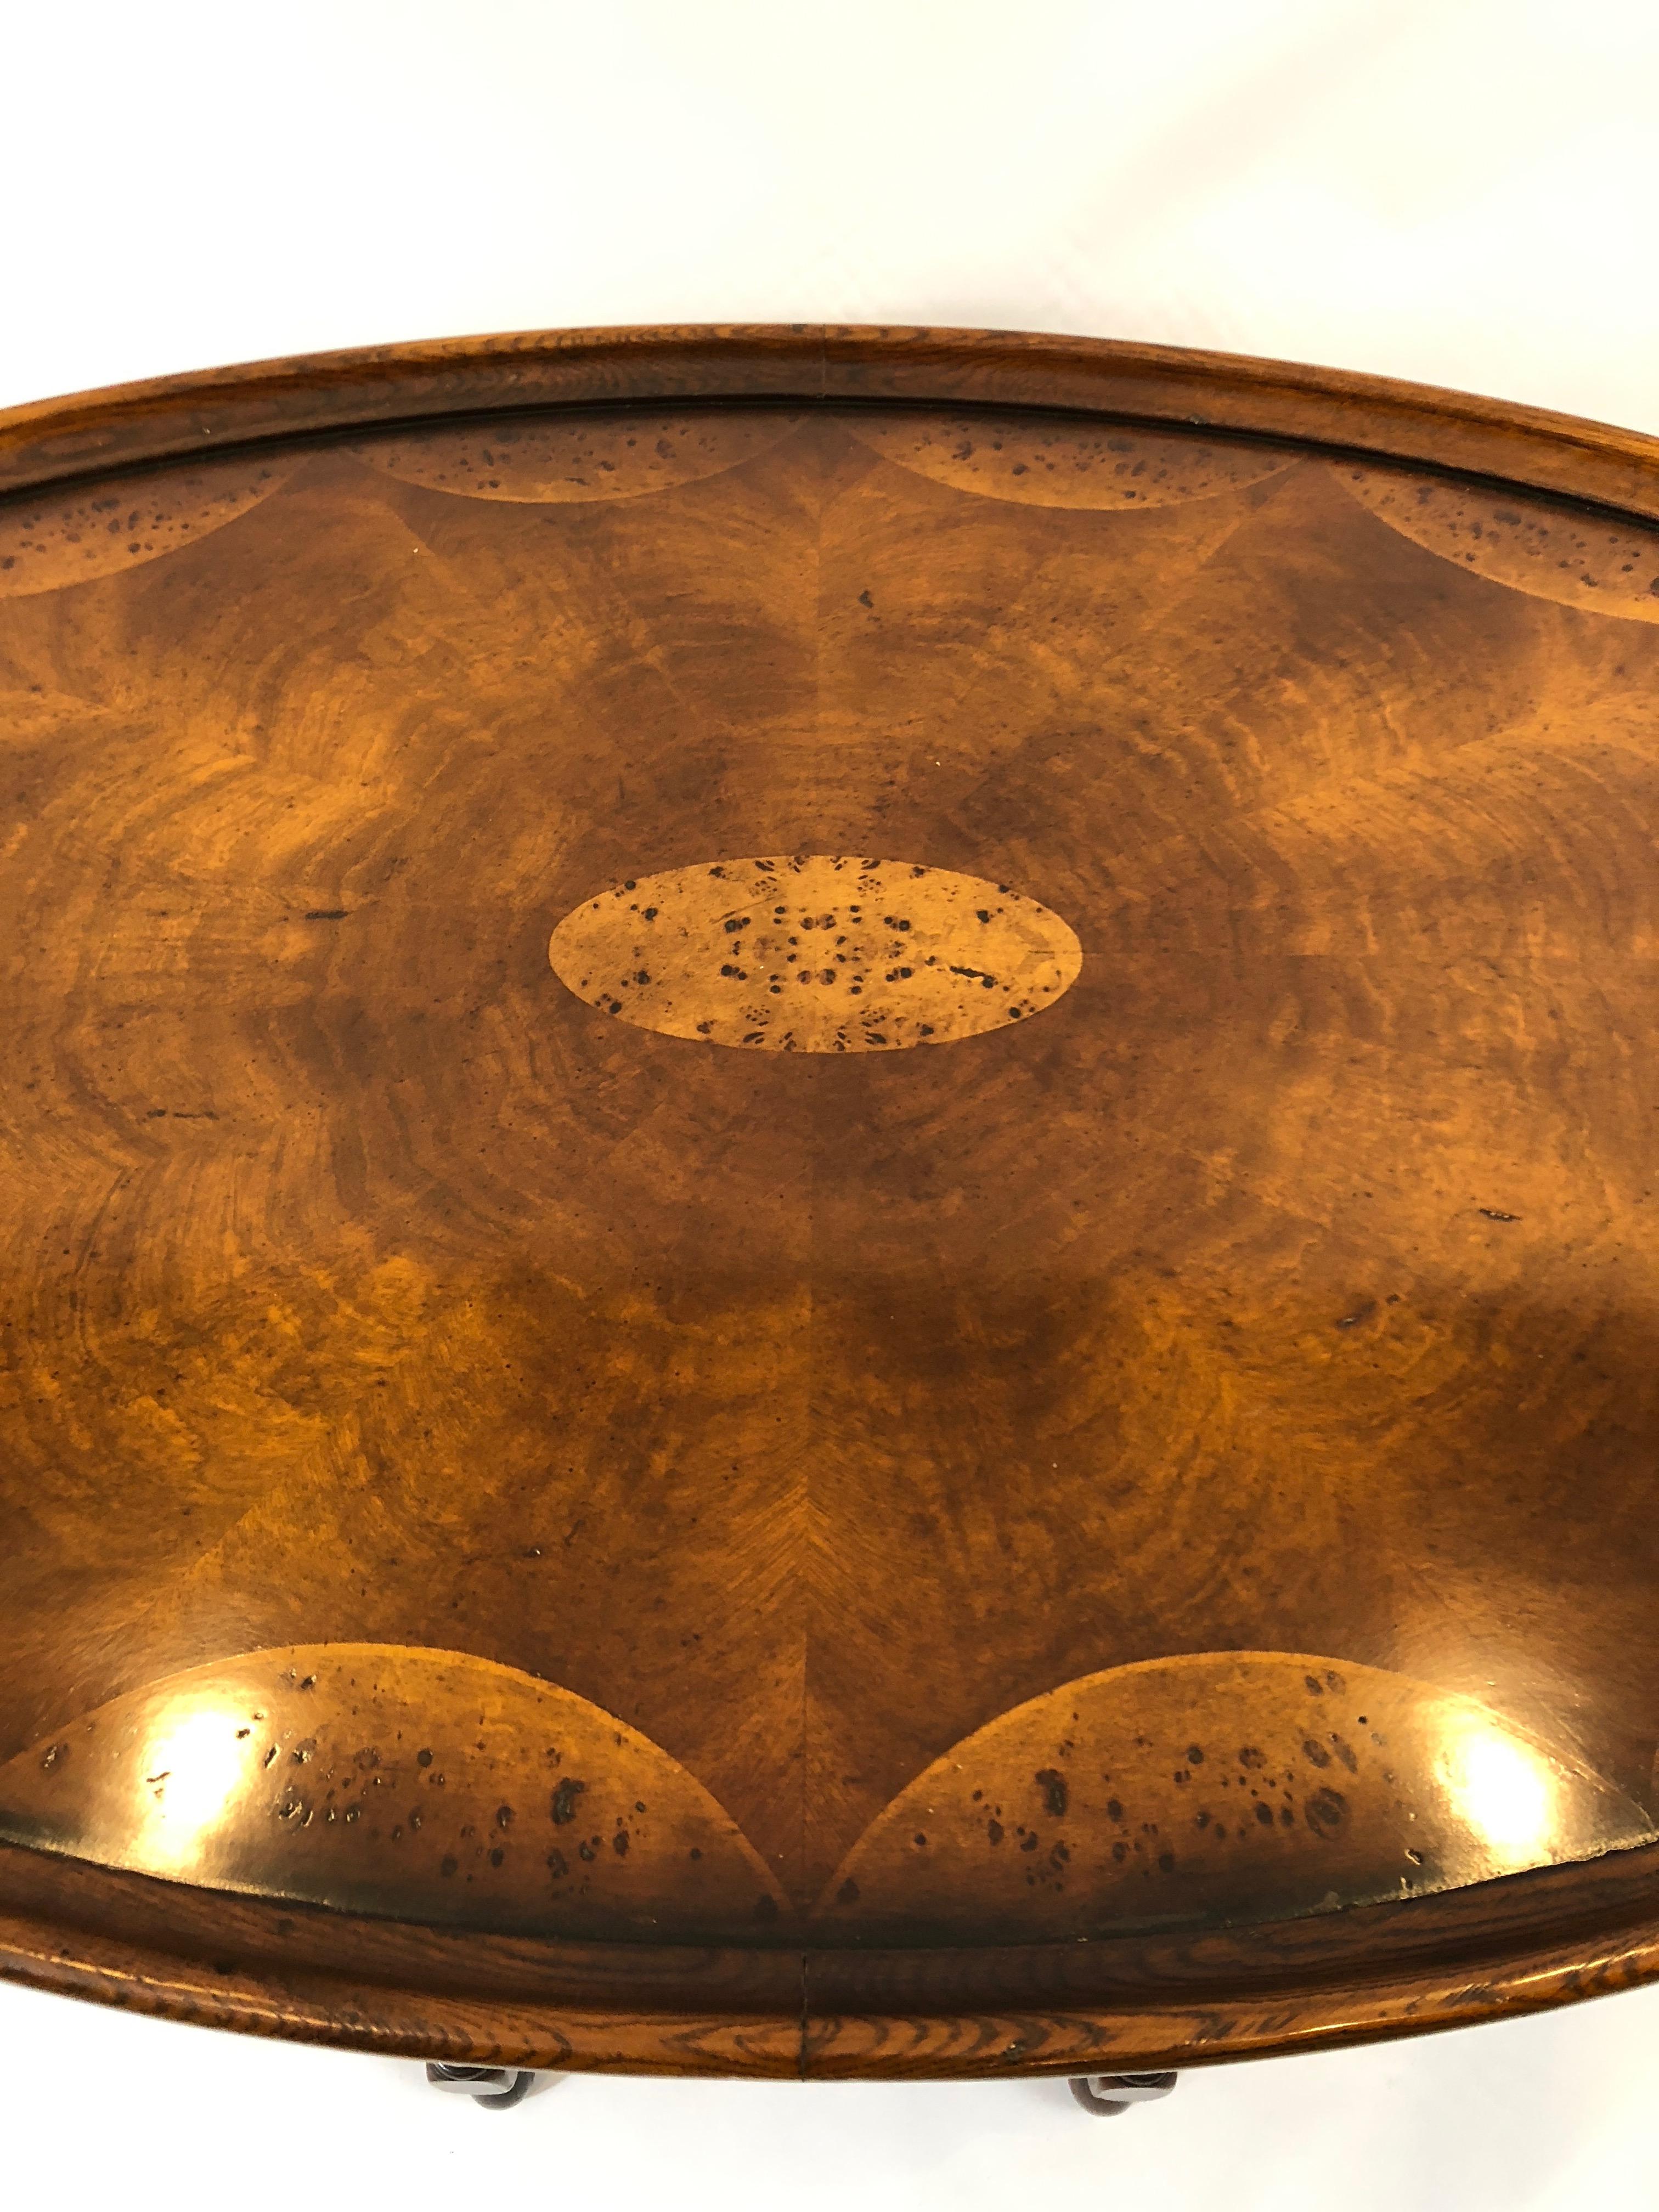 Richly impressive oval burl wood coffee table having an inlaid top with scallop design around the periphery, central medallion, oak surround, intricate network of turned legs, and wonderful pullout / pull-out slides at each end. Beautiful